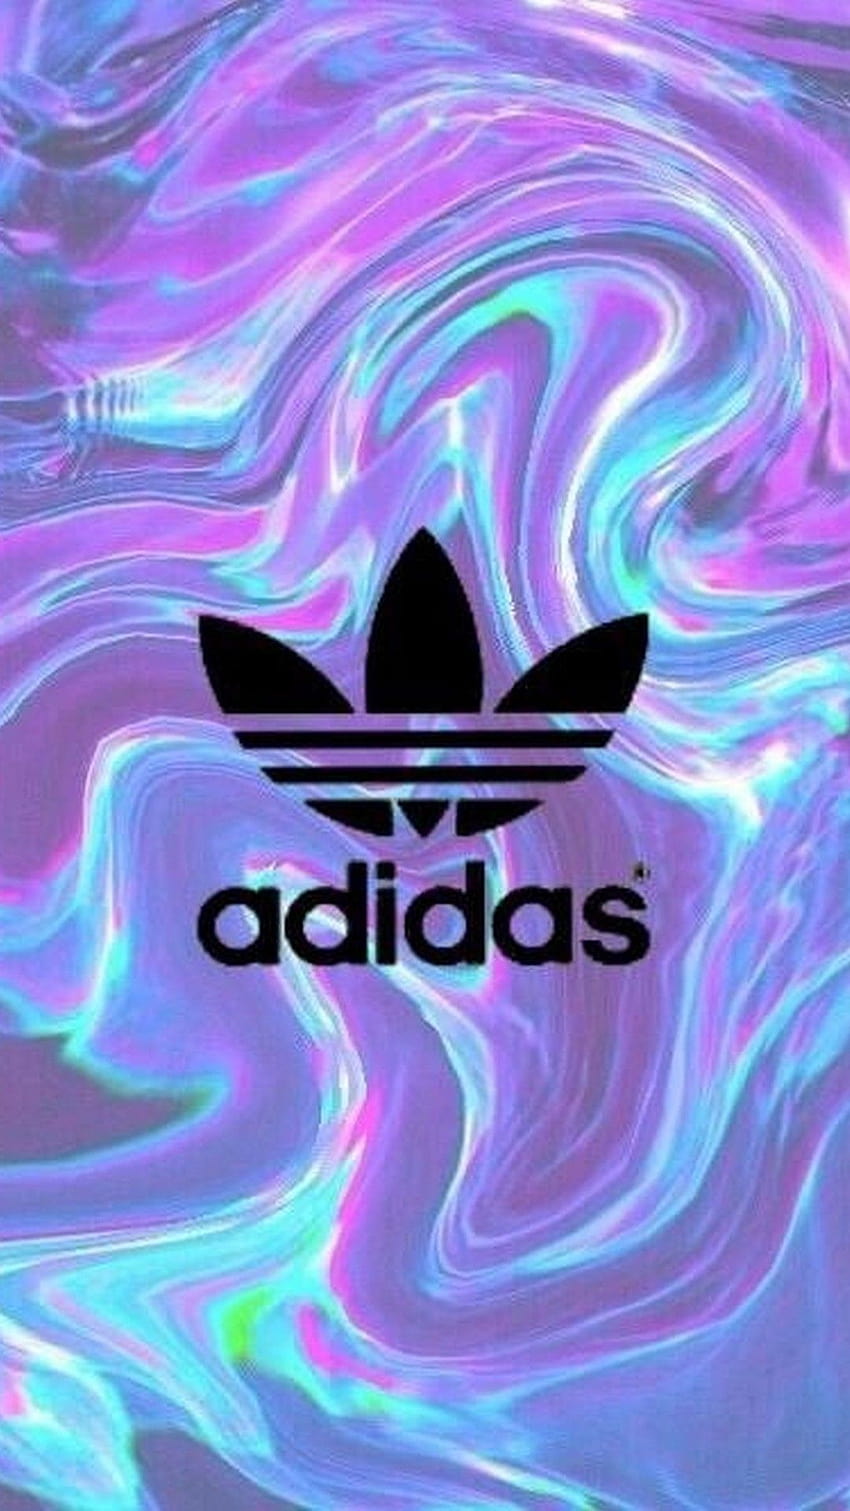 Adidas Backgrounds posted by Michelle Anderson, adidas for girls HD phone wallpaper